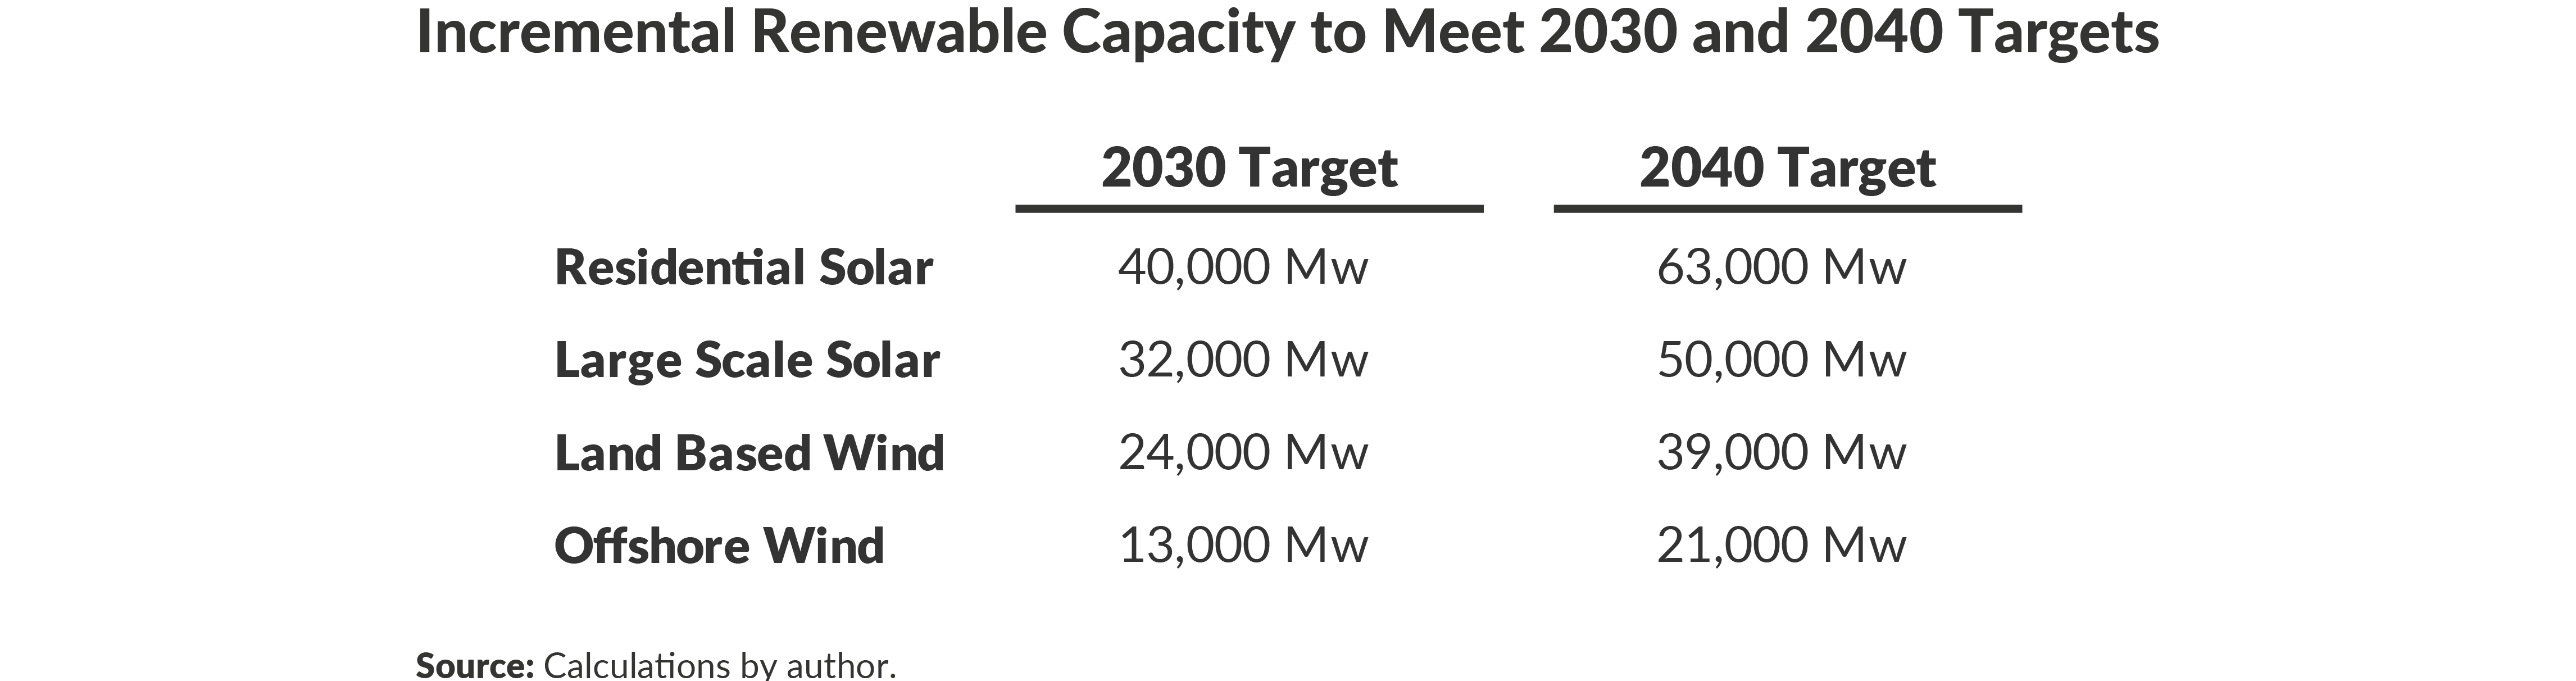 Incremental Renewable Capacity to Meet 2030 and 2040 Targets